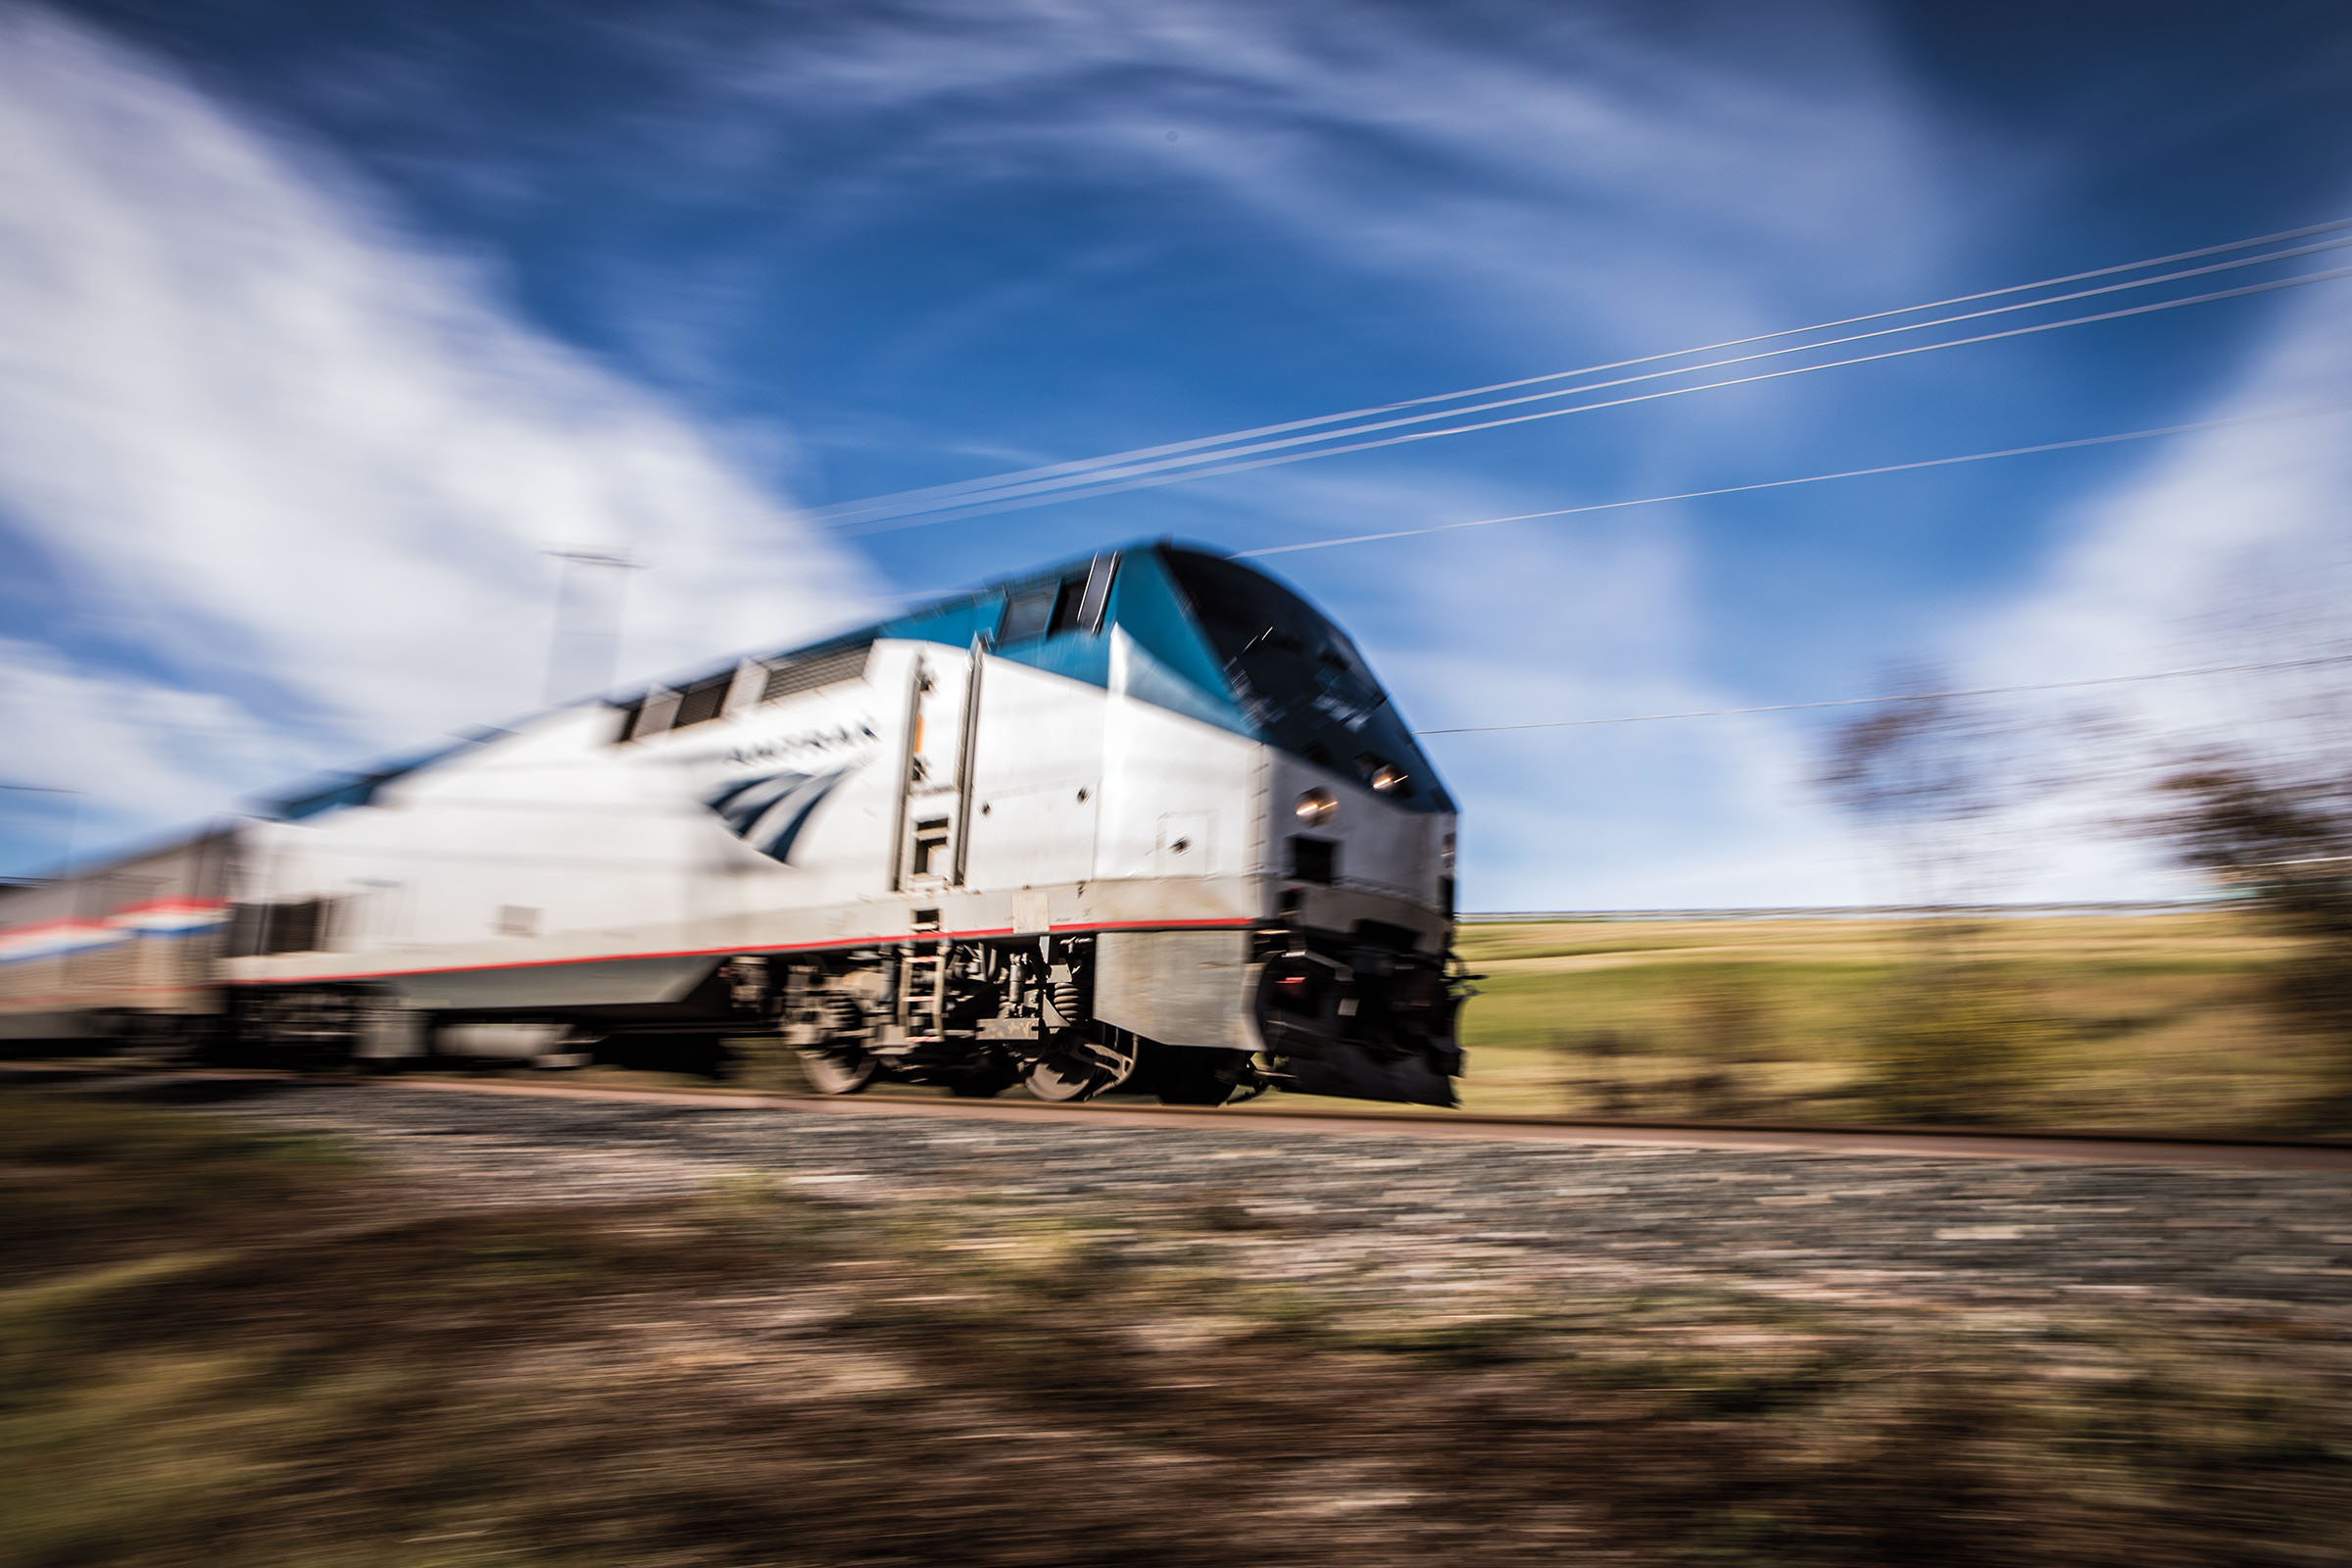 A blue and white locomotive whizzes past a landscape with a blue sky and gray train grade